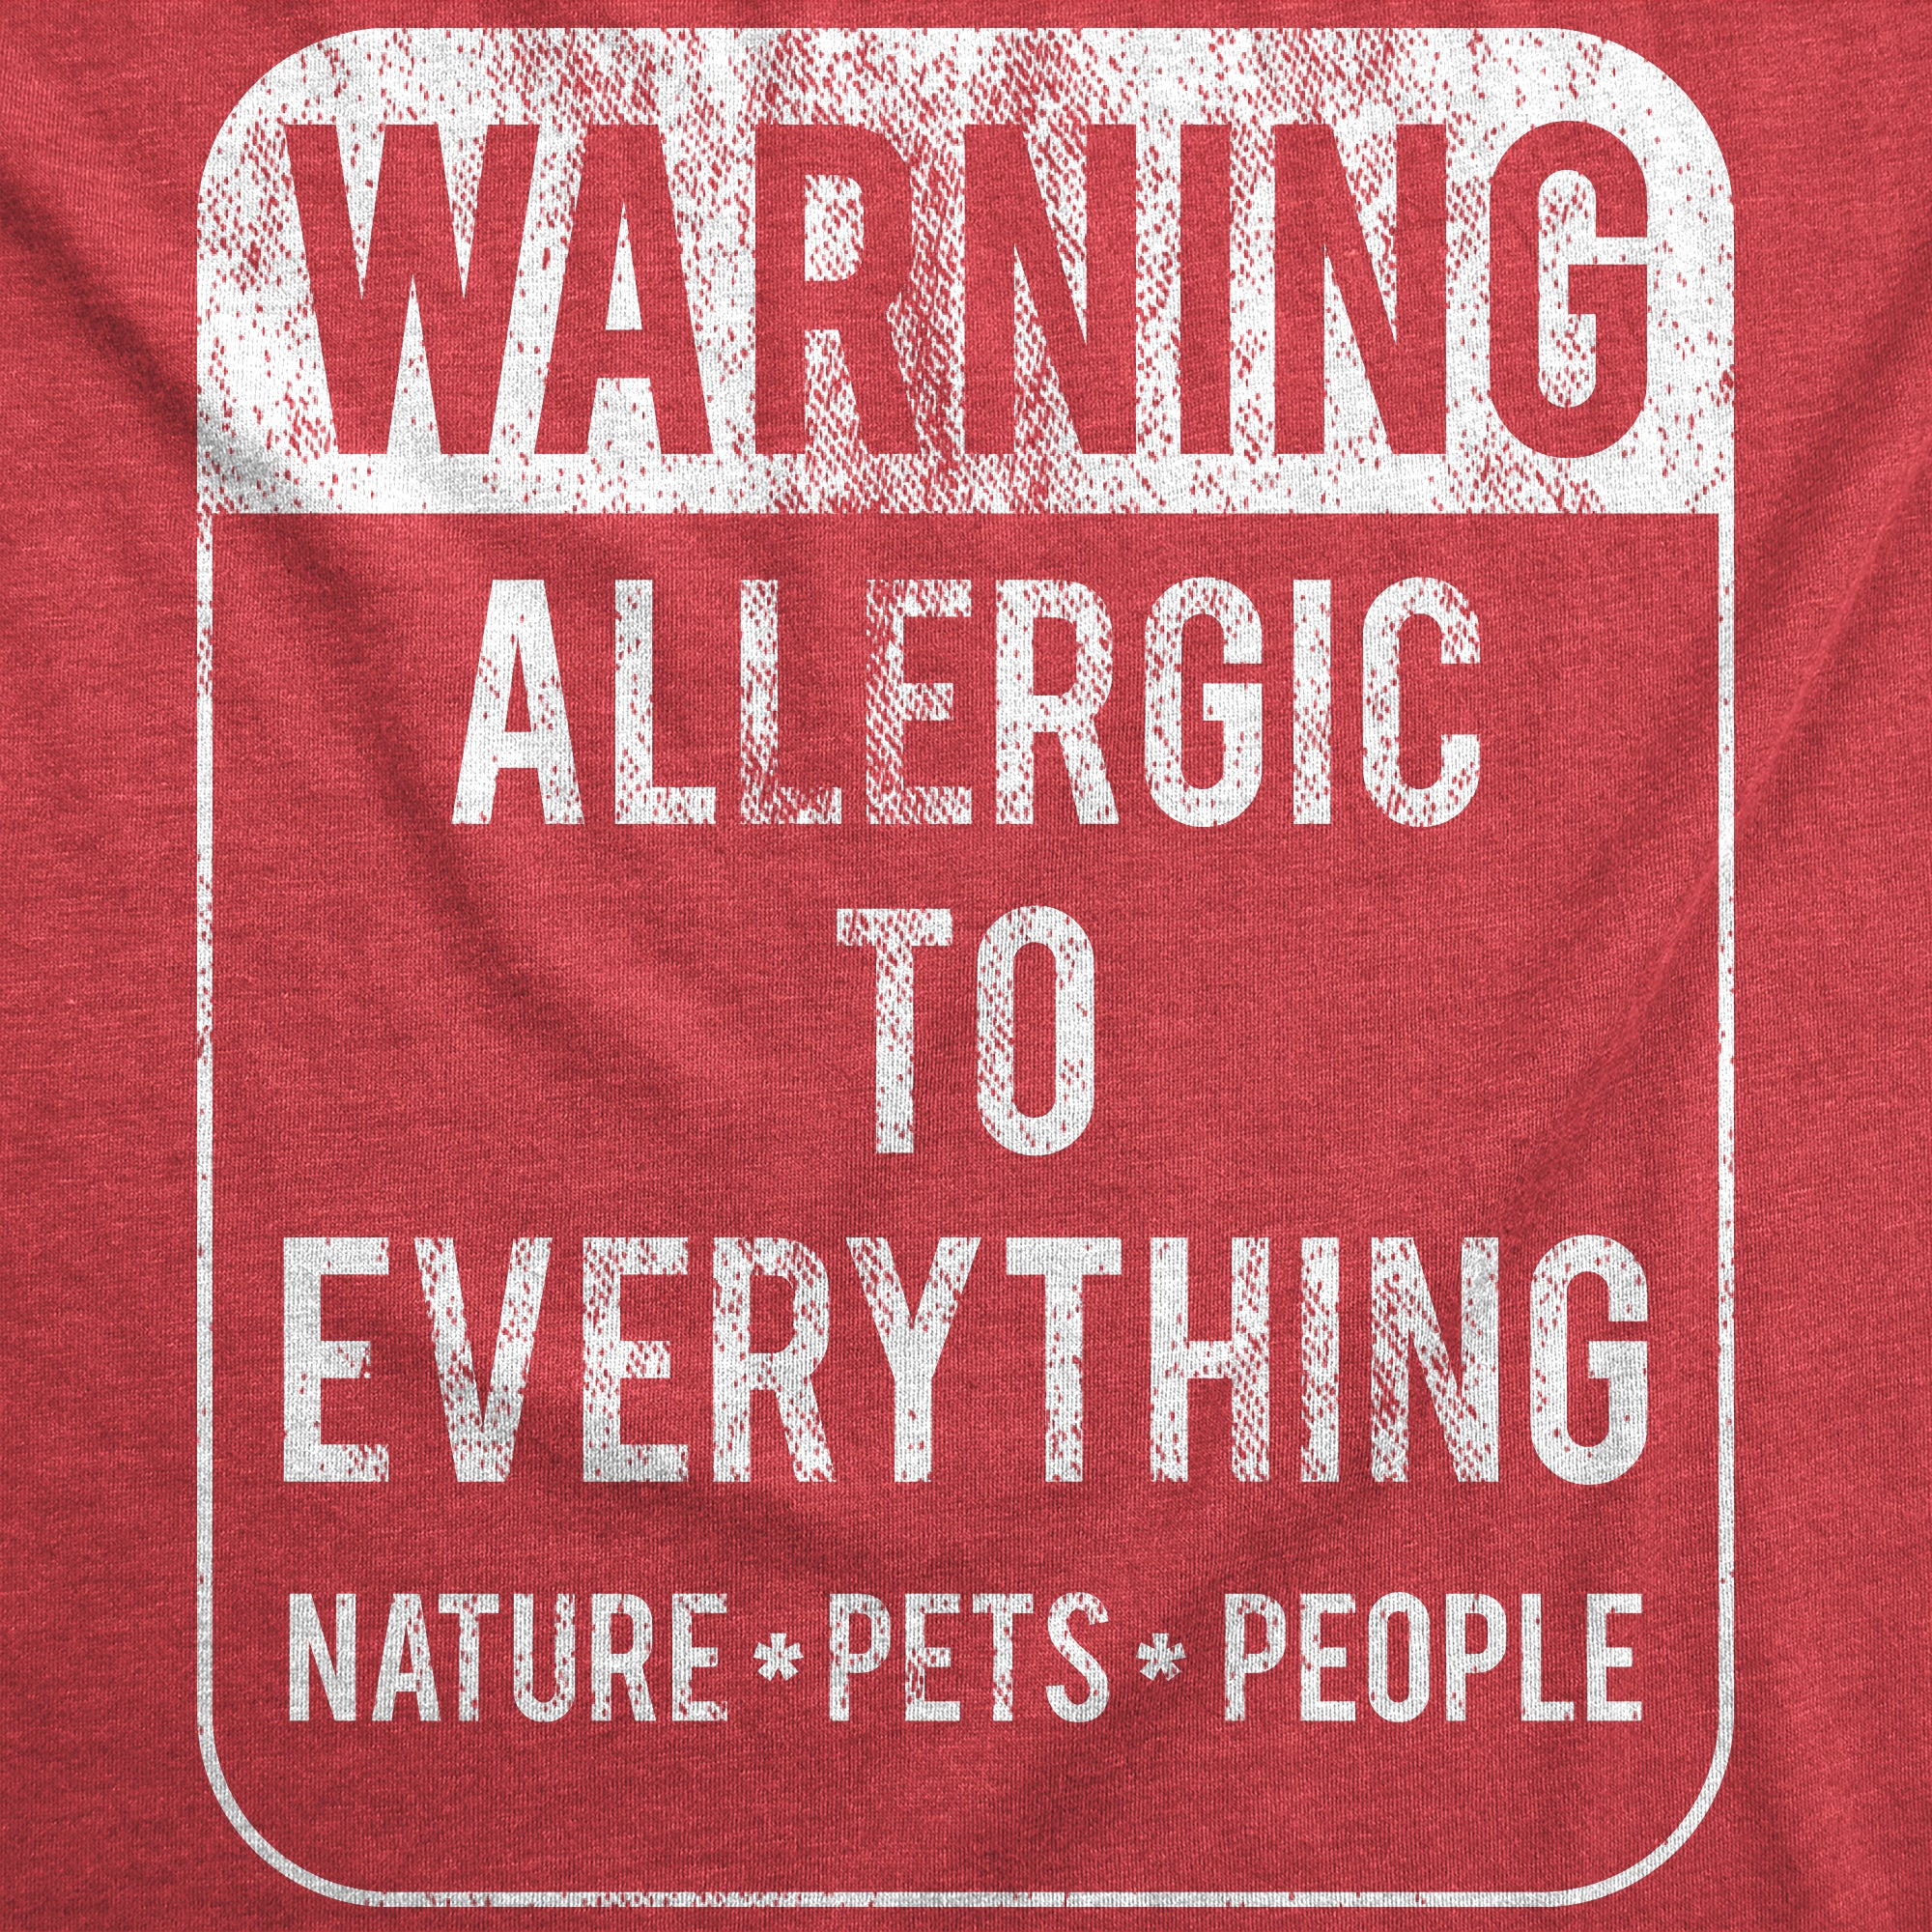 Funny Heather Red - Warning Allergic To Everything Warning Allergic To Everything Mens T Shirt Nerdy sarcastic Introvert Tee